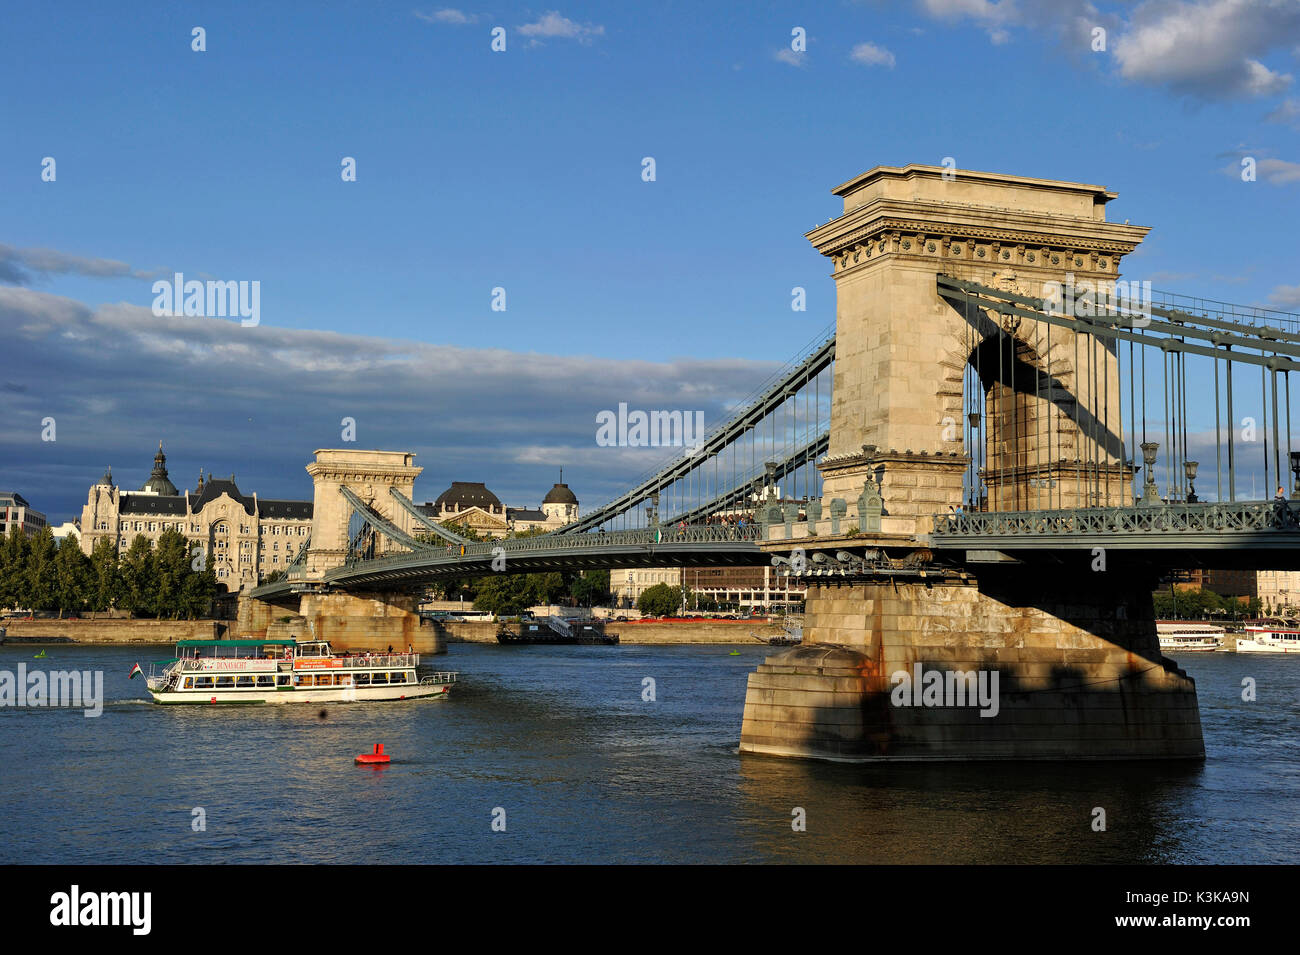 Hungary, Budapest, the Danube river, the Chain Bridge (Szechenyi Lanchid) listed as World Heritage by UNESCO and the Gresham Palace Stock Photo